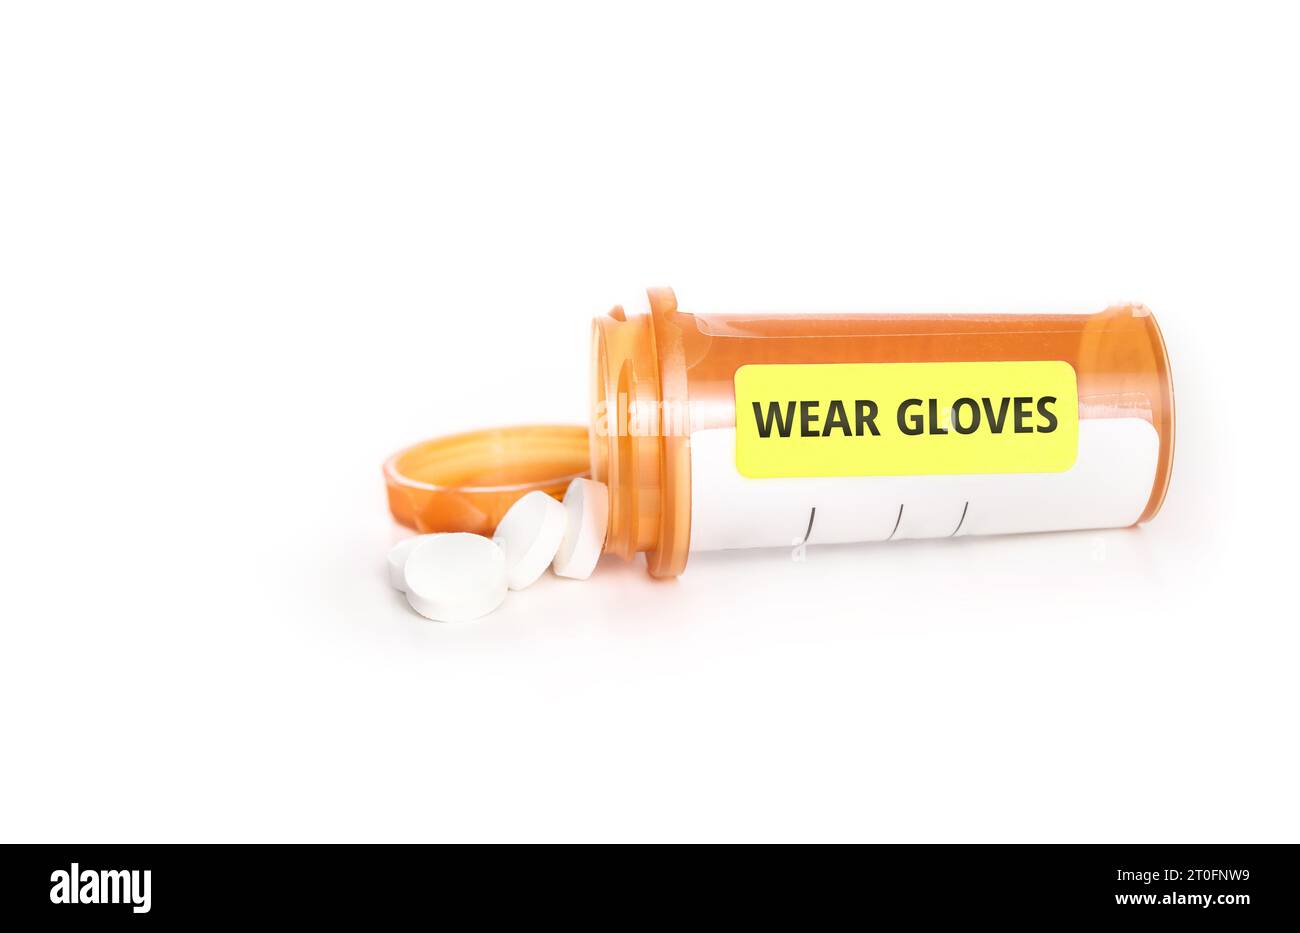 Pill bottle with wear glove label for chemotherapy or hazard medicines. Orange prescription bottle with pills falling out. For humans, pets or animals Stock Photo